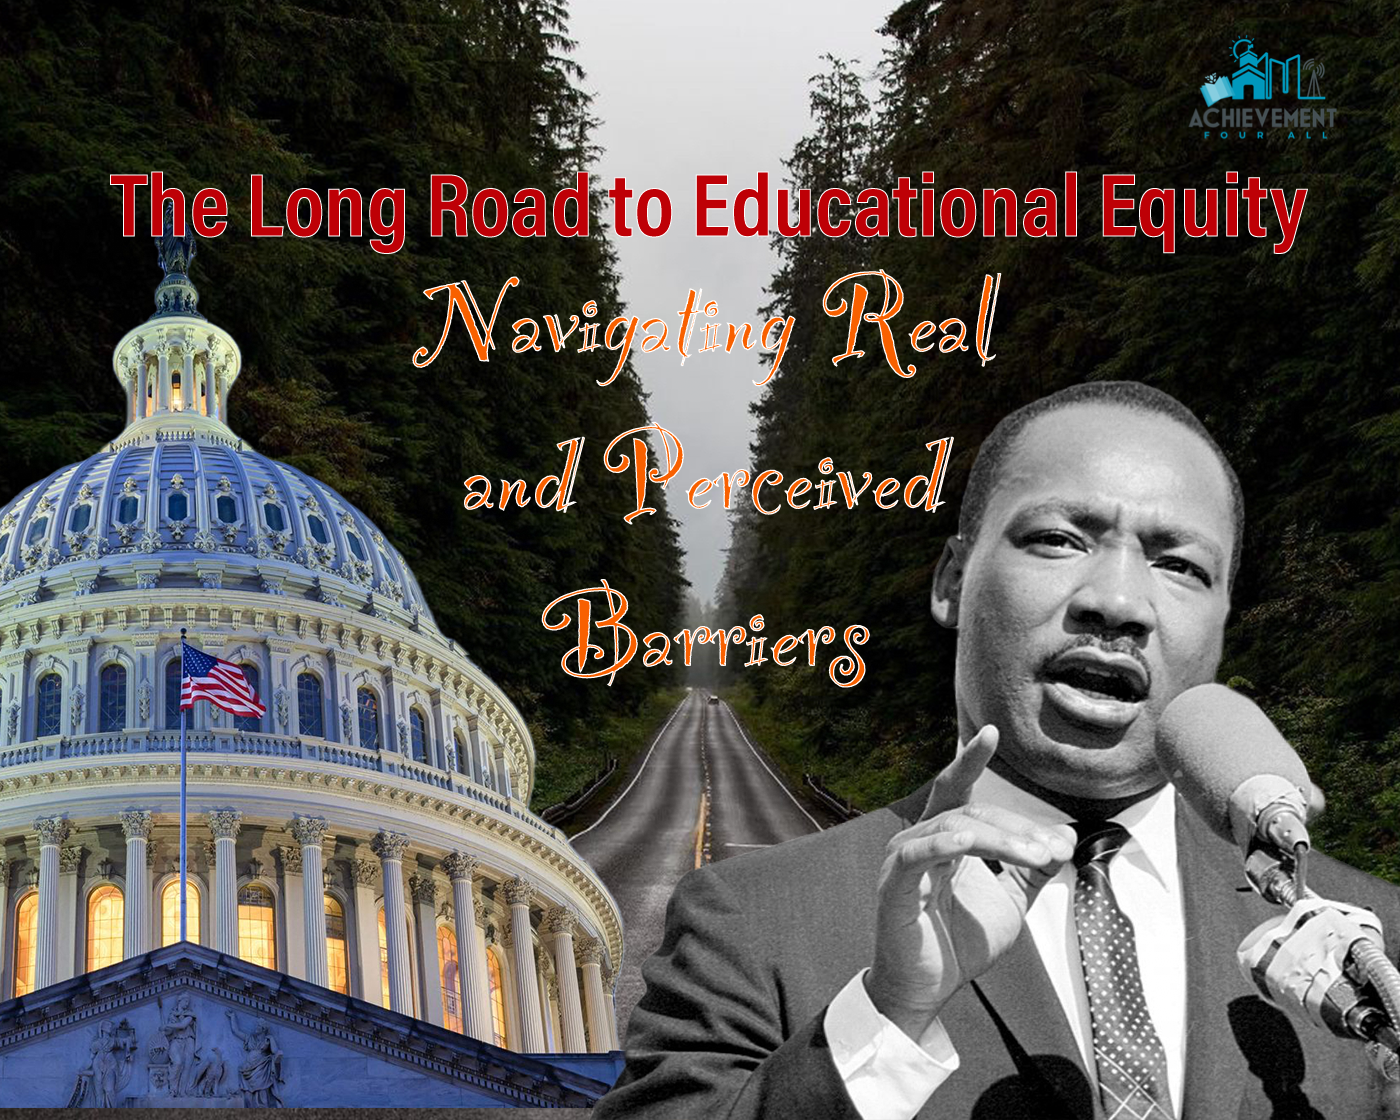 The Long Road to Educational Equity: Navigating Real and Perceived Barriers